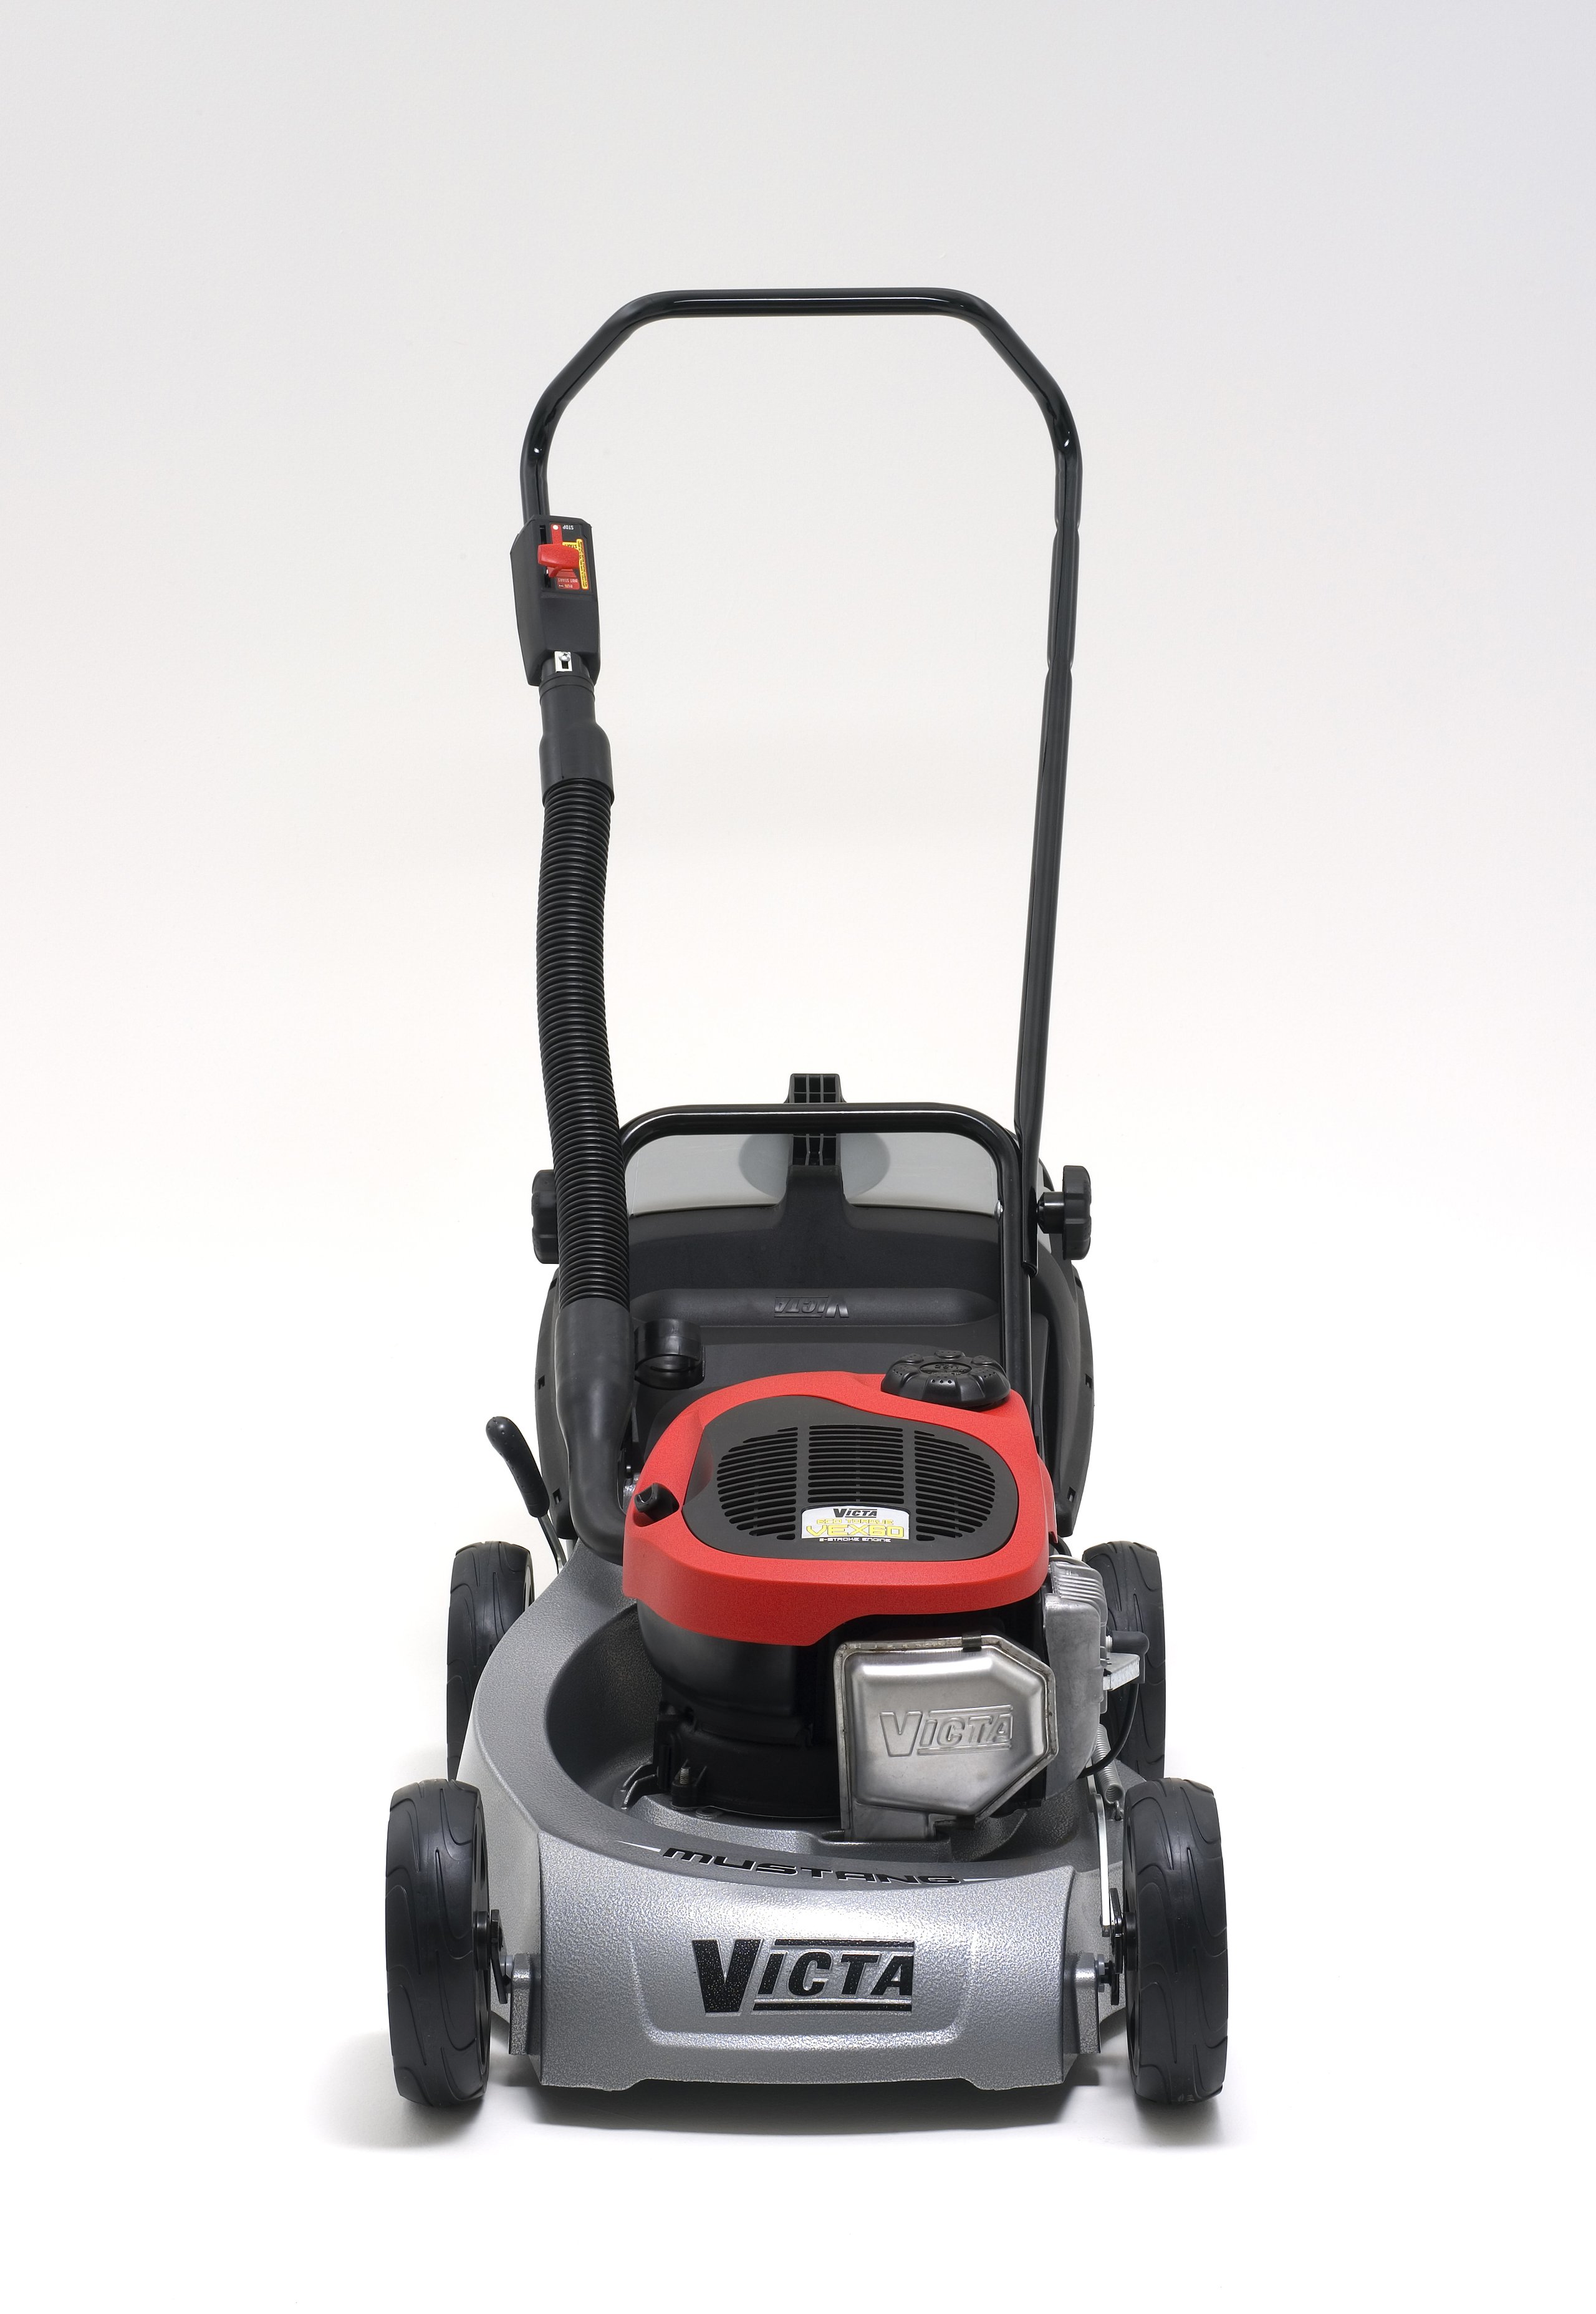 Victa Mustang lawnmower with Eco Torque engine and manuals